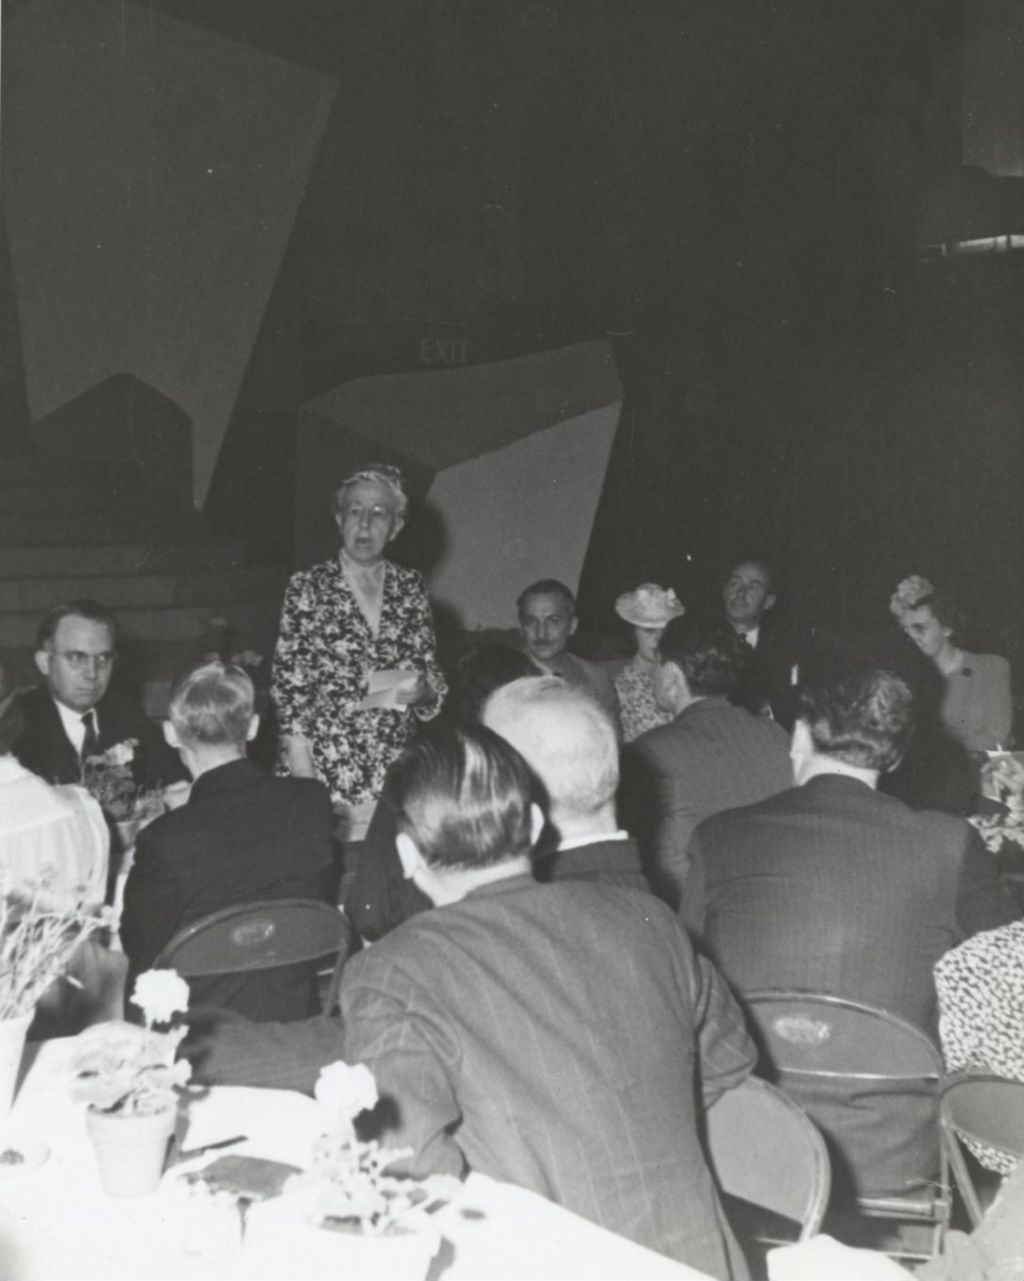 Miniature of Louise DeKoven Bowen addresses attendees at 1941 Hull-House Annual Dinner